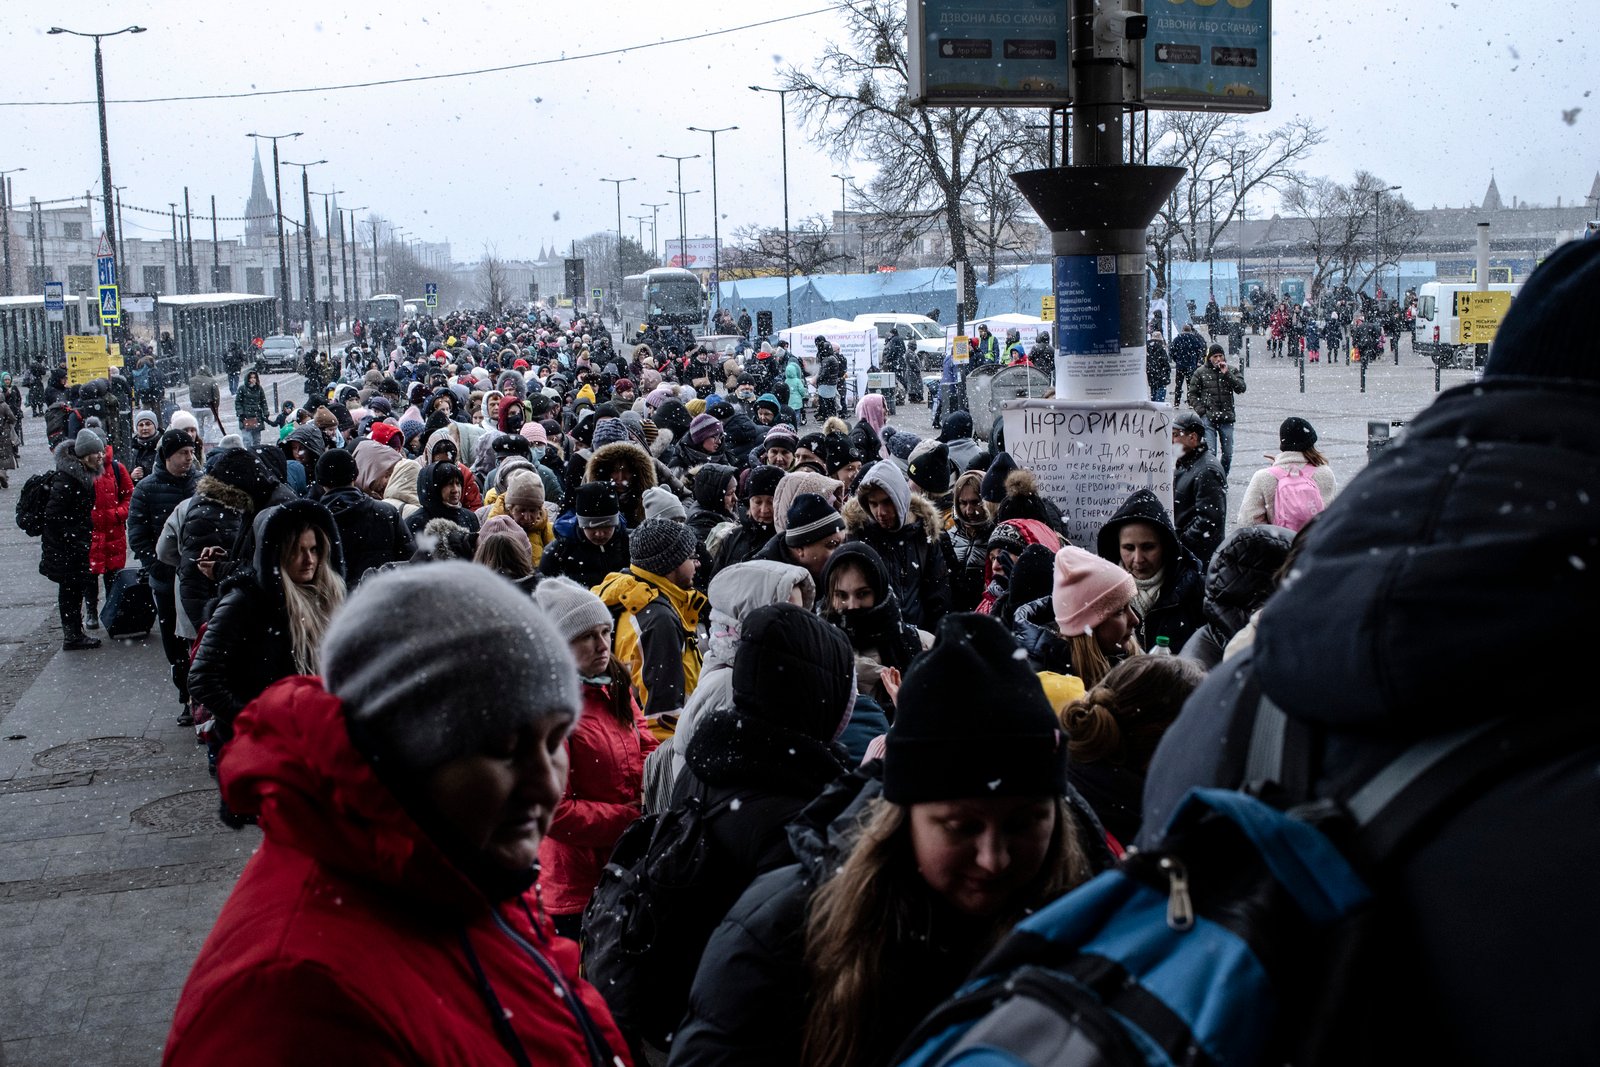 People line up for hours to enter the main railway station in Lviv, Ukraine.